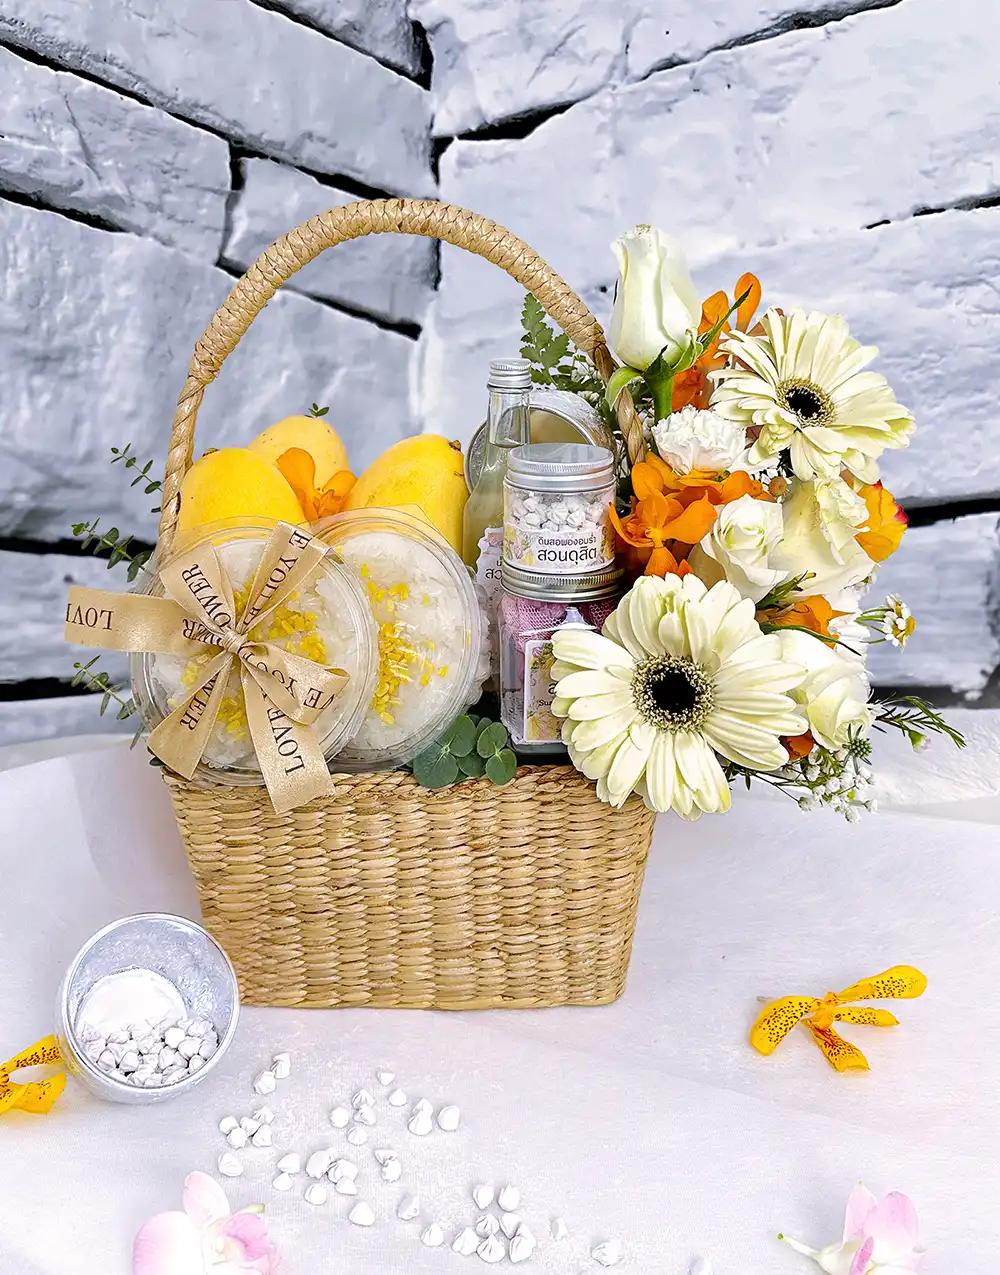 Songkran gift basket BFS009 with mango sticky rice and cooling Thai aroma set, adorned with orange-tone flowers.